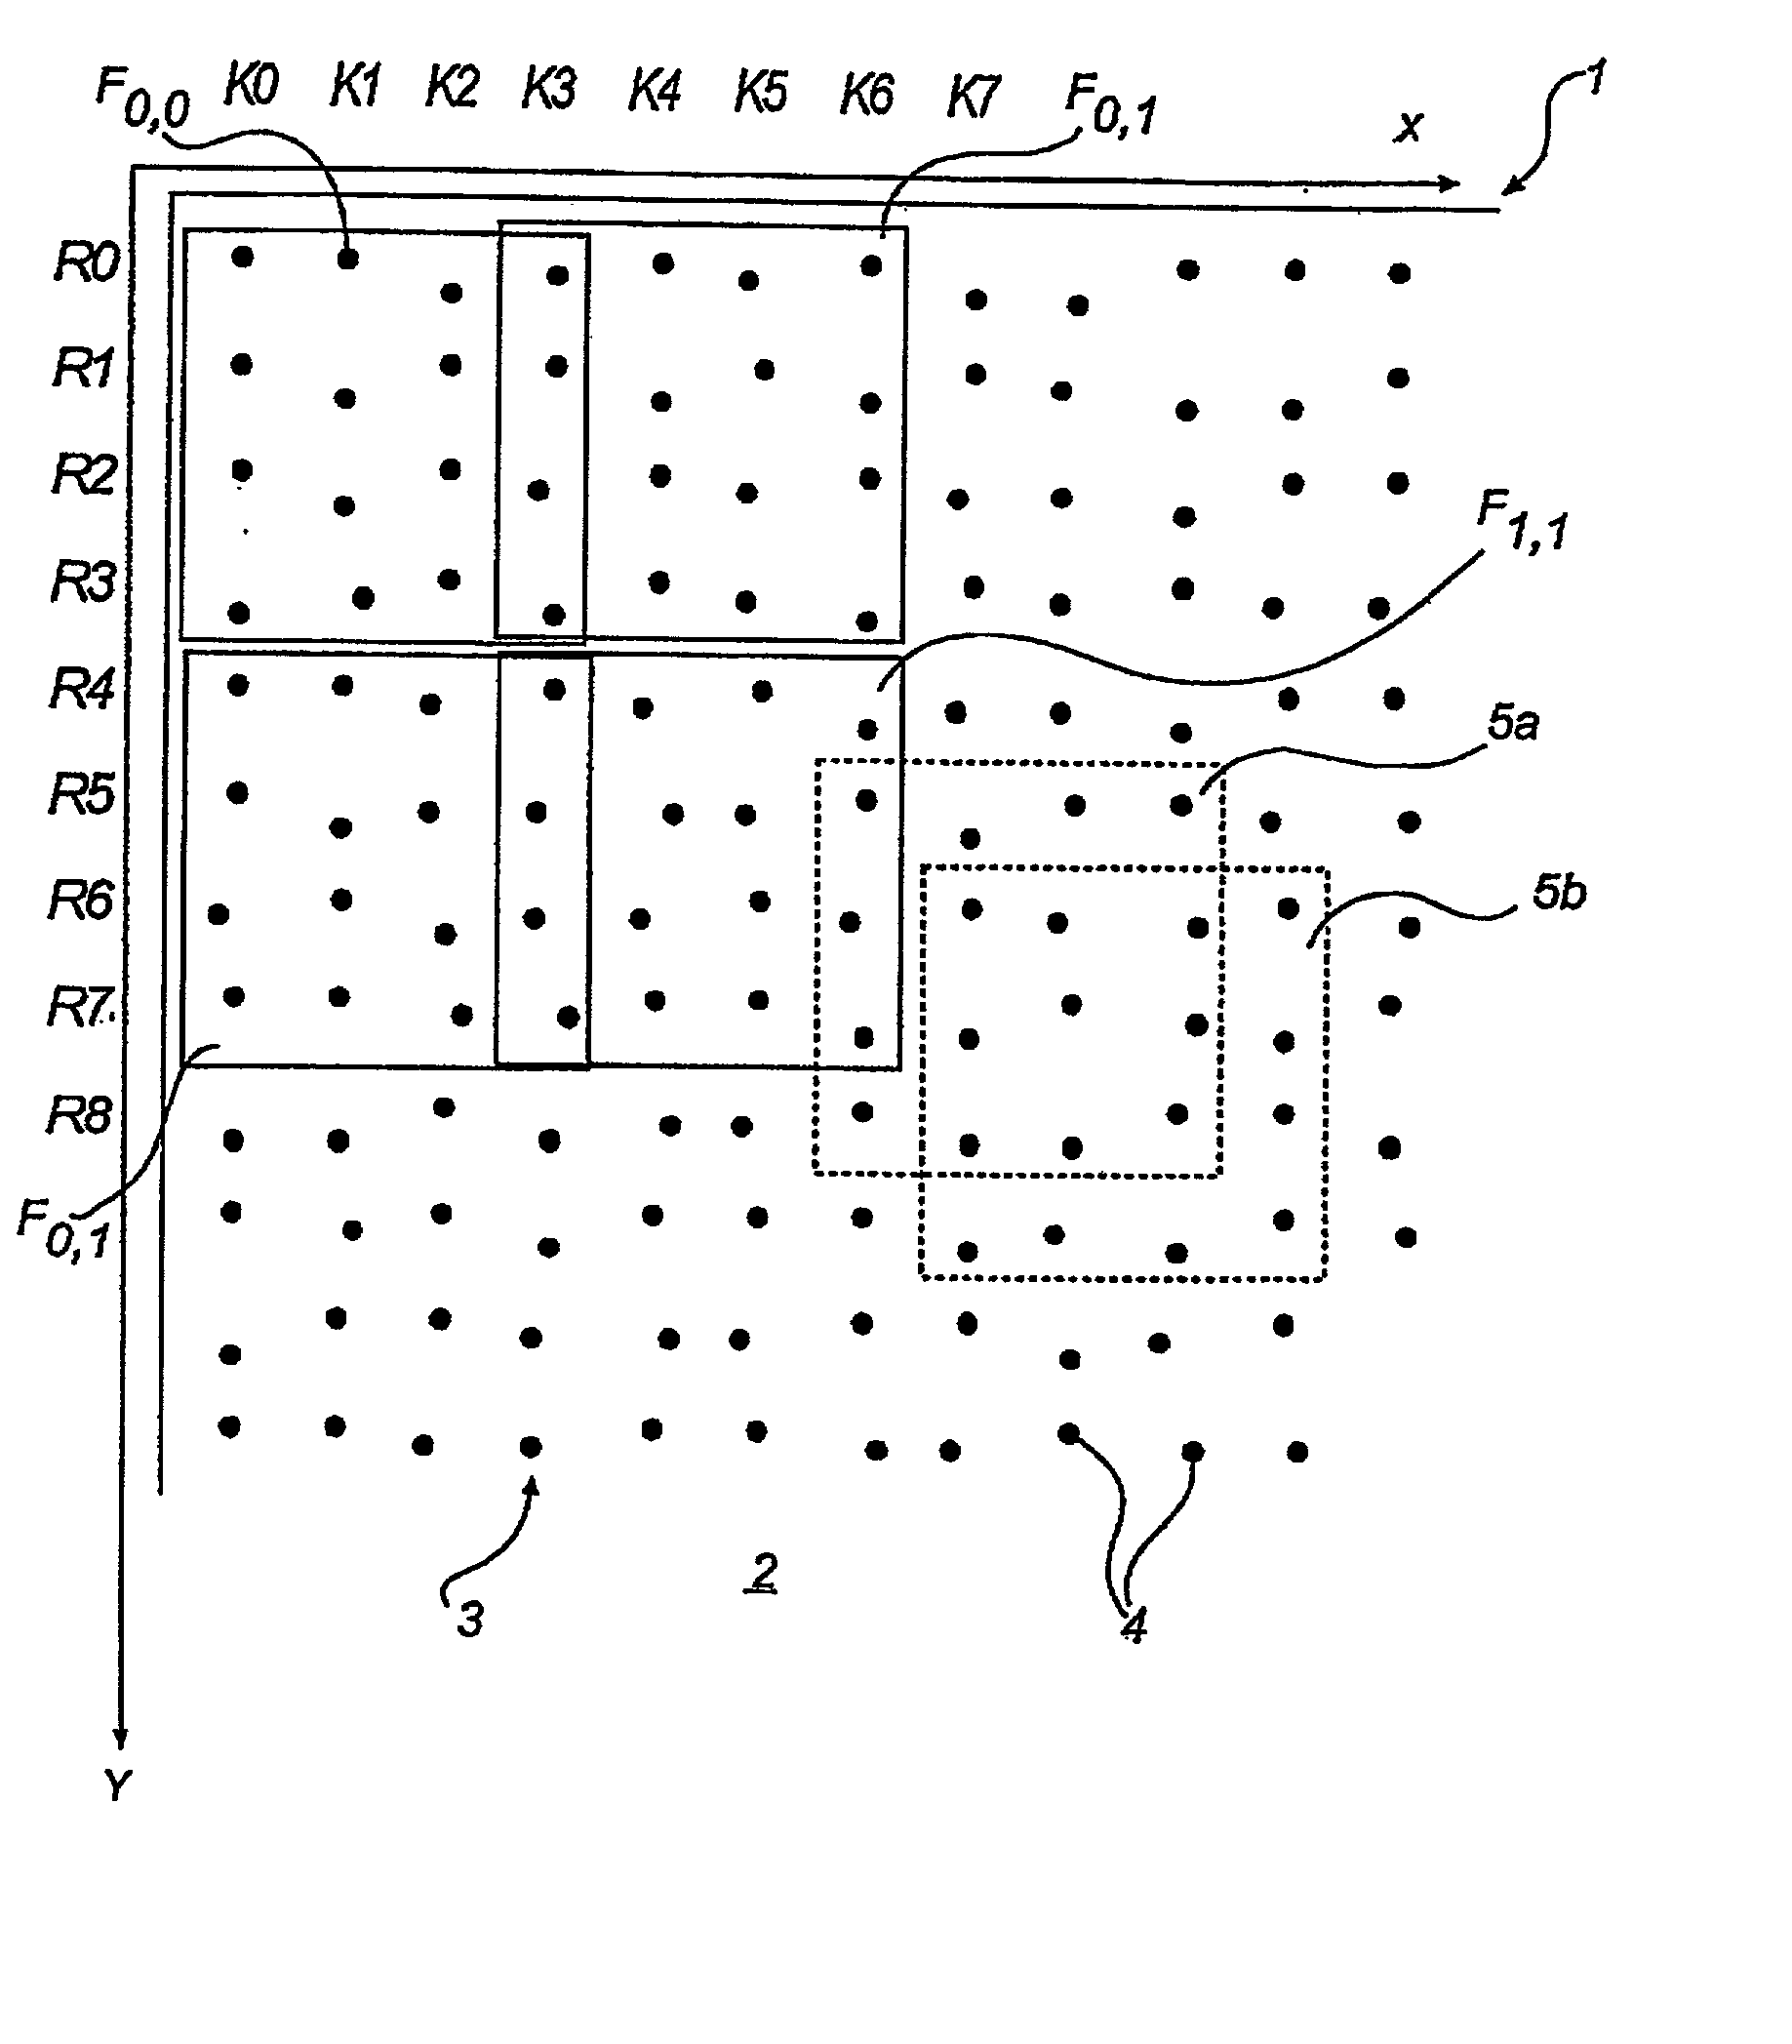 Apparatus and methods relating to image coding